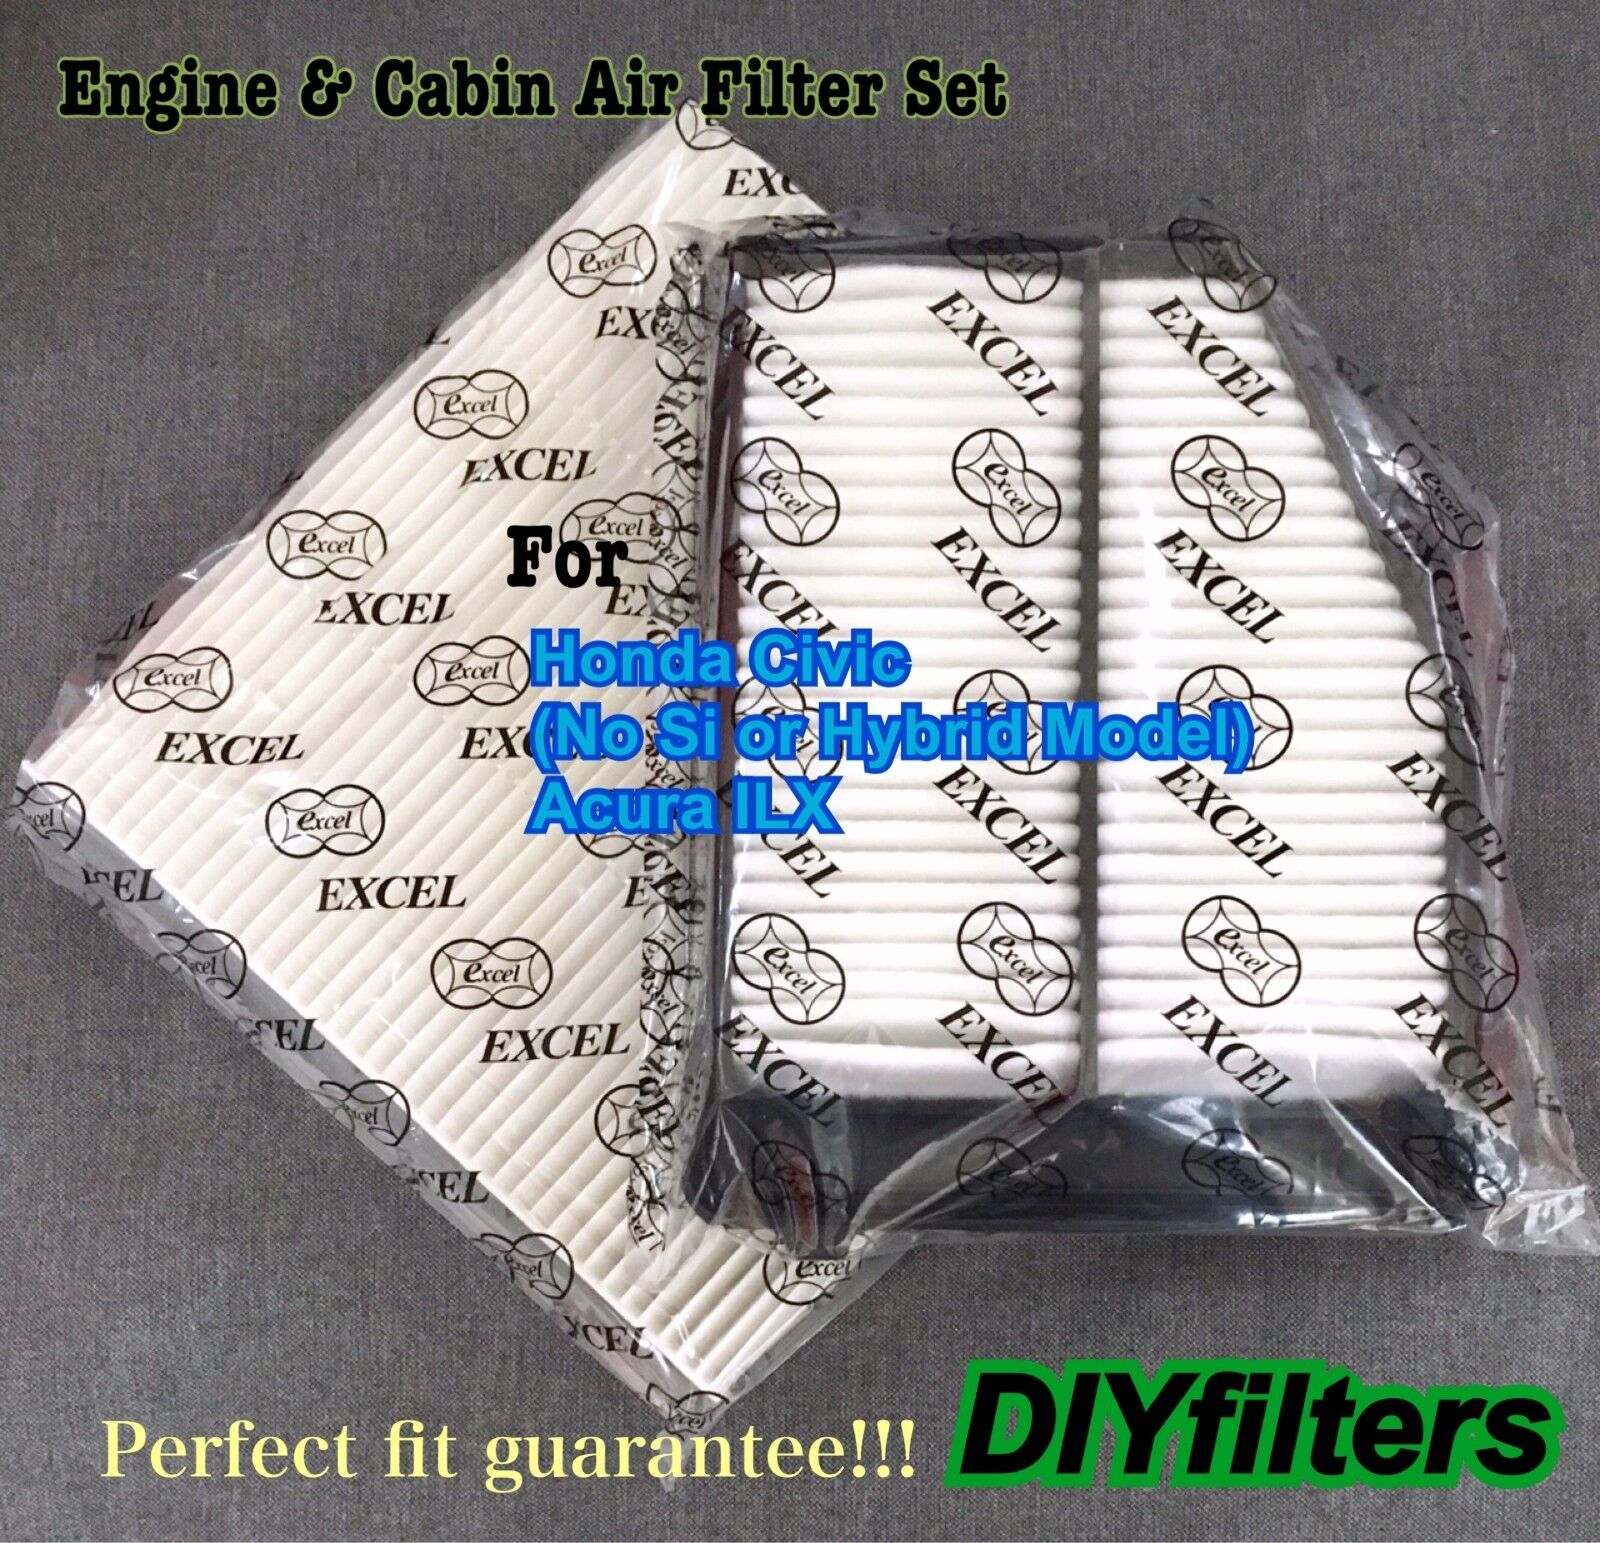 Engine And Cabin Air Filter For CIVIC 2012-15 & ILX 2013-15 AF6171 C35519